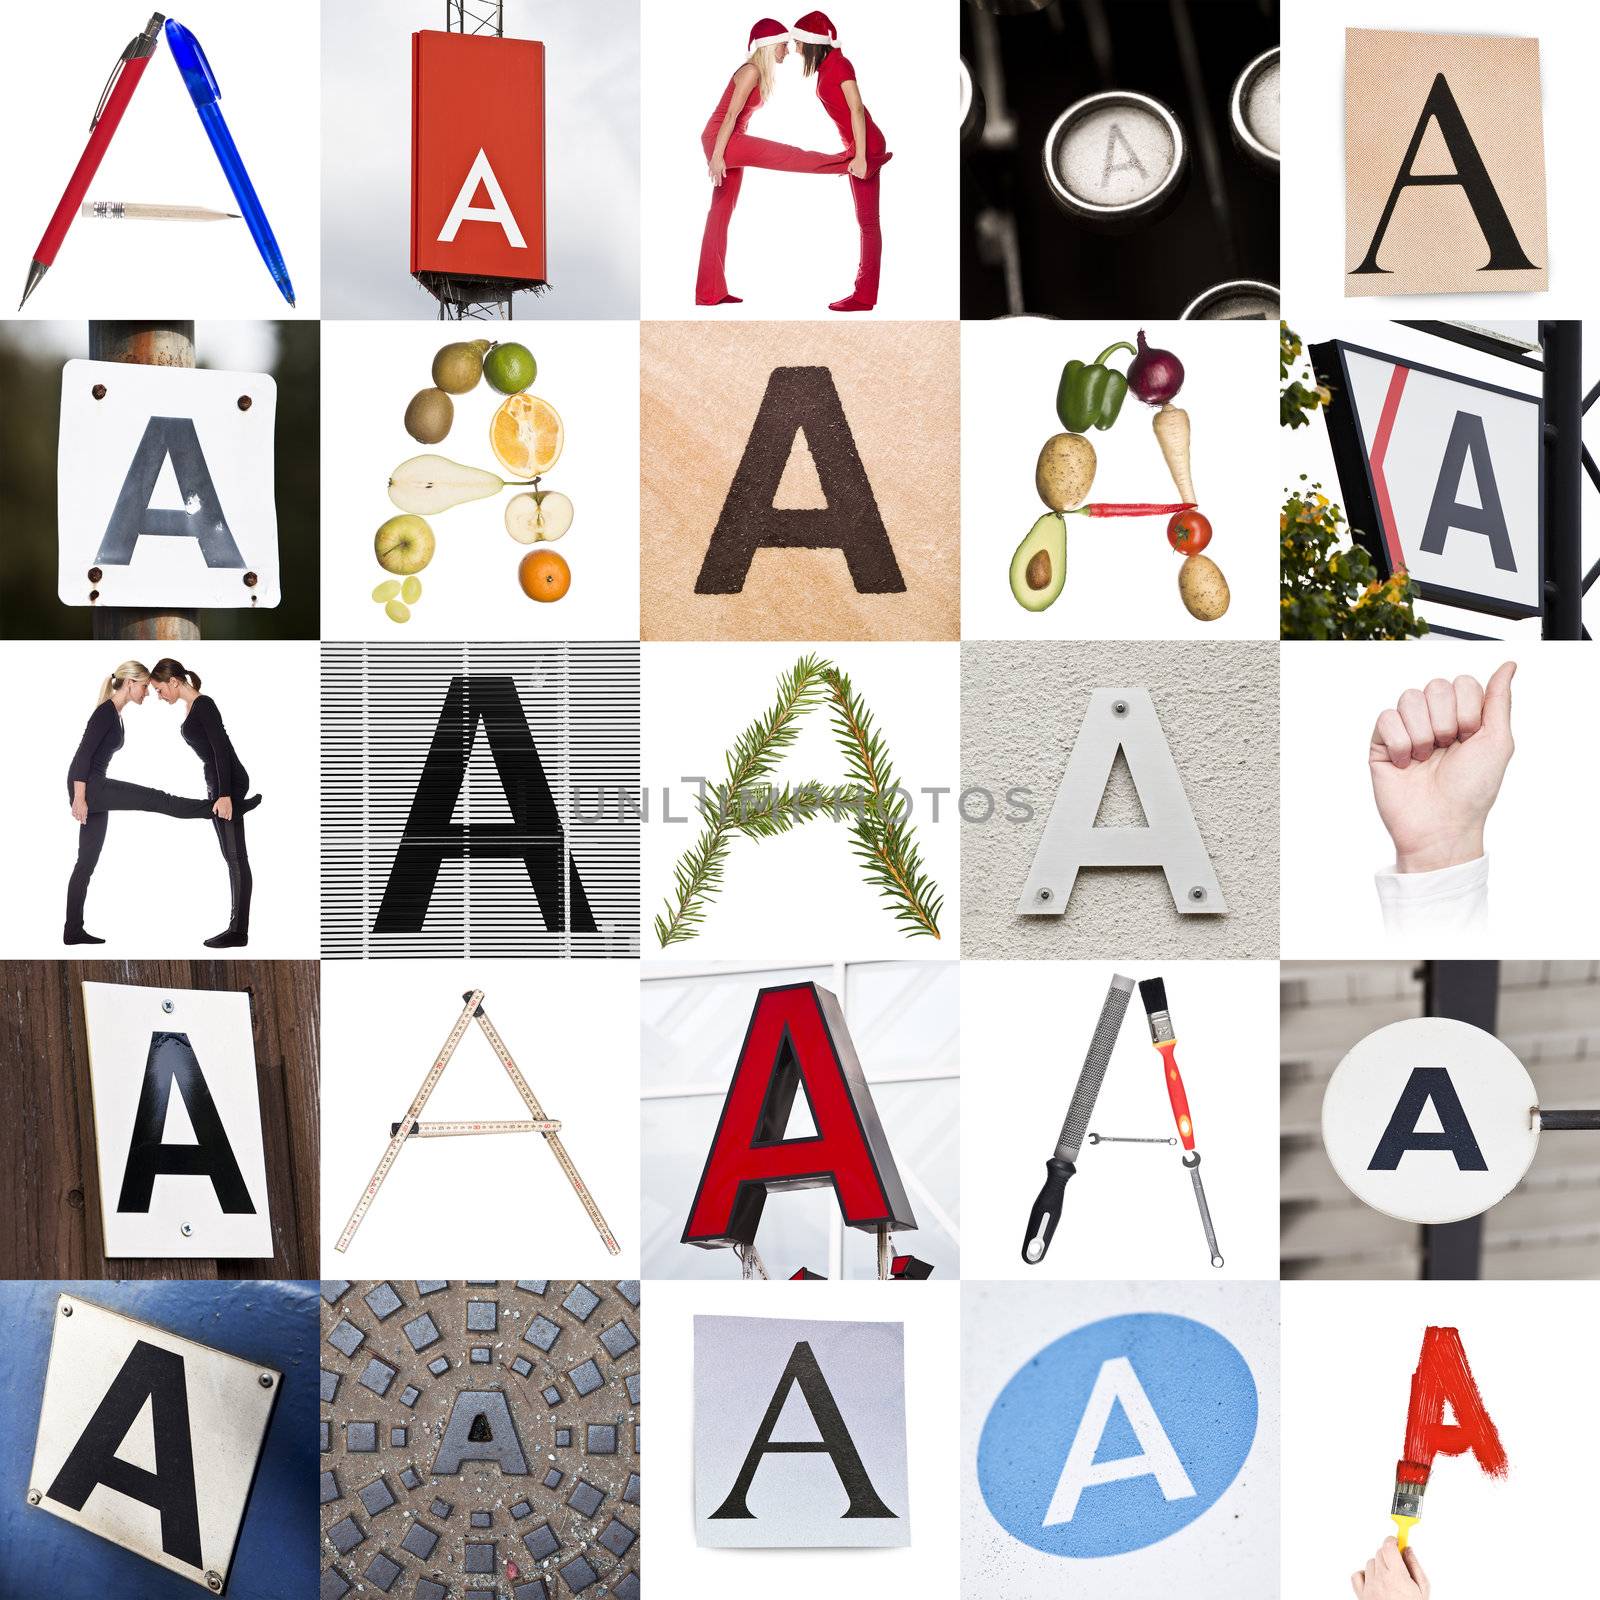 Collage of Letter A by gemenacom